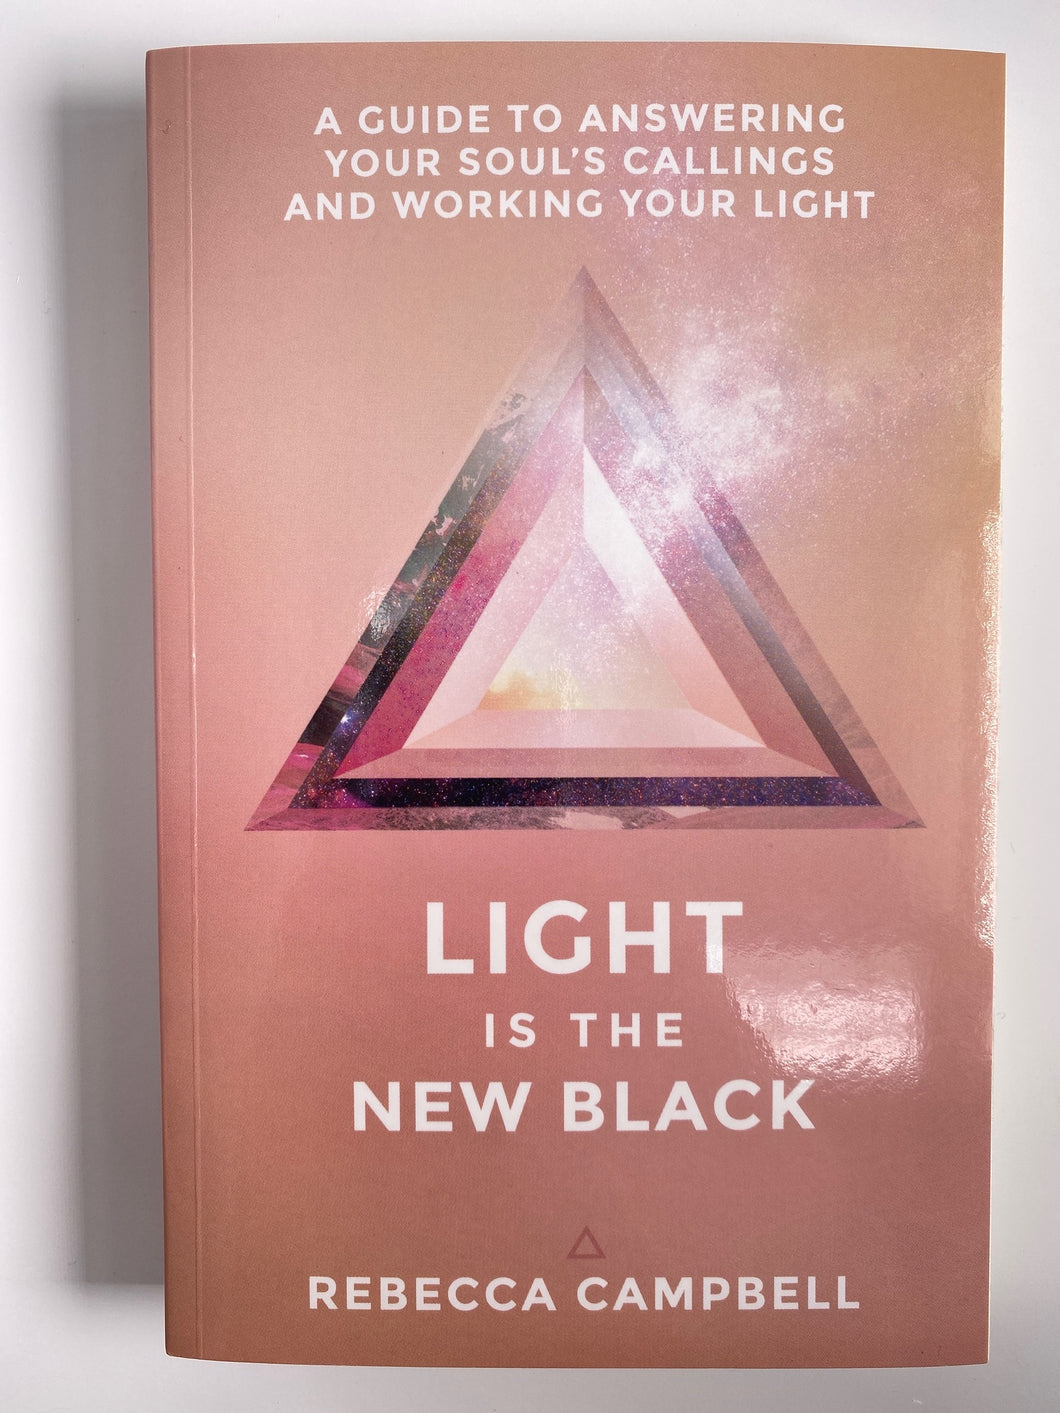 Light is the New Black by Rebecca Campbell